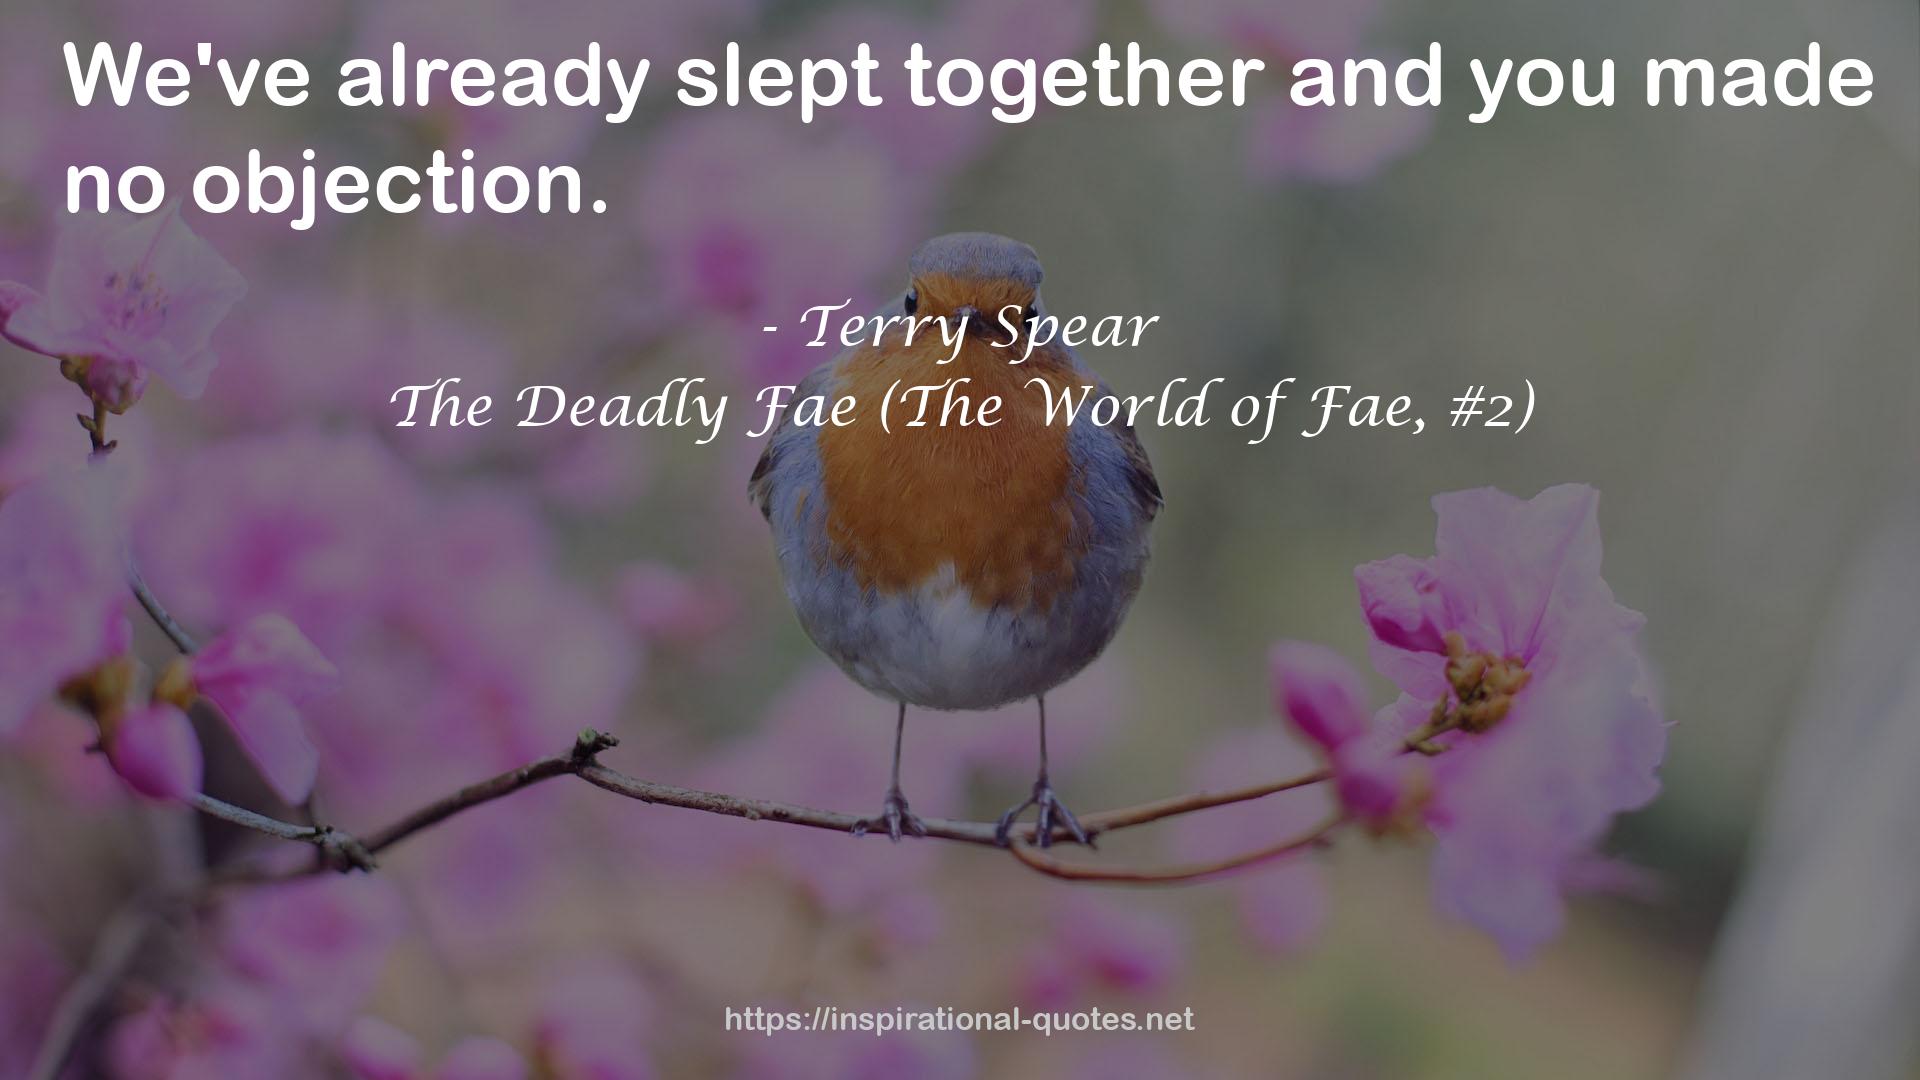 The Deadly Fae (The World of Fae, #2) QUOTES